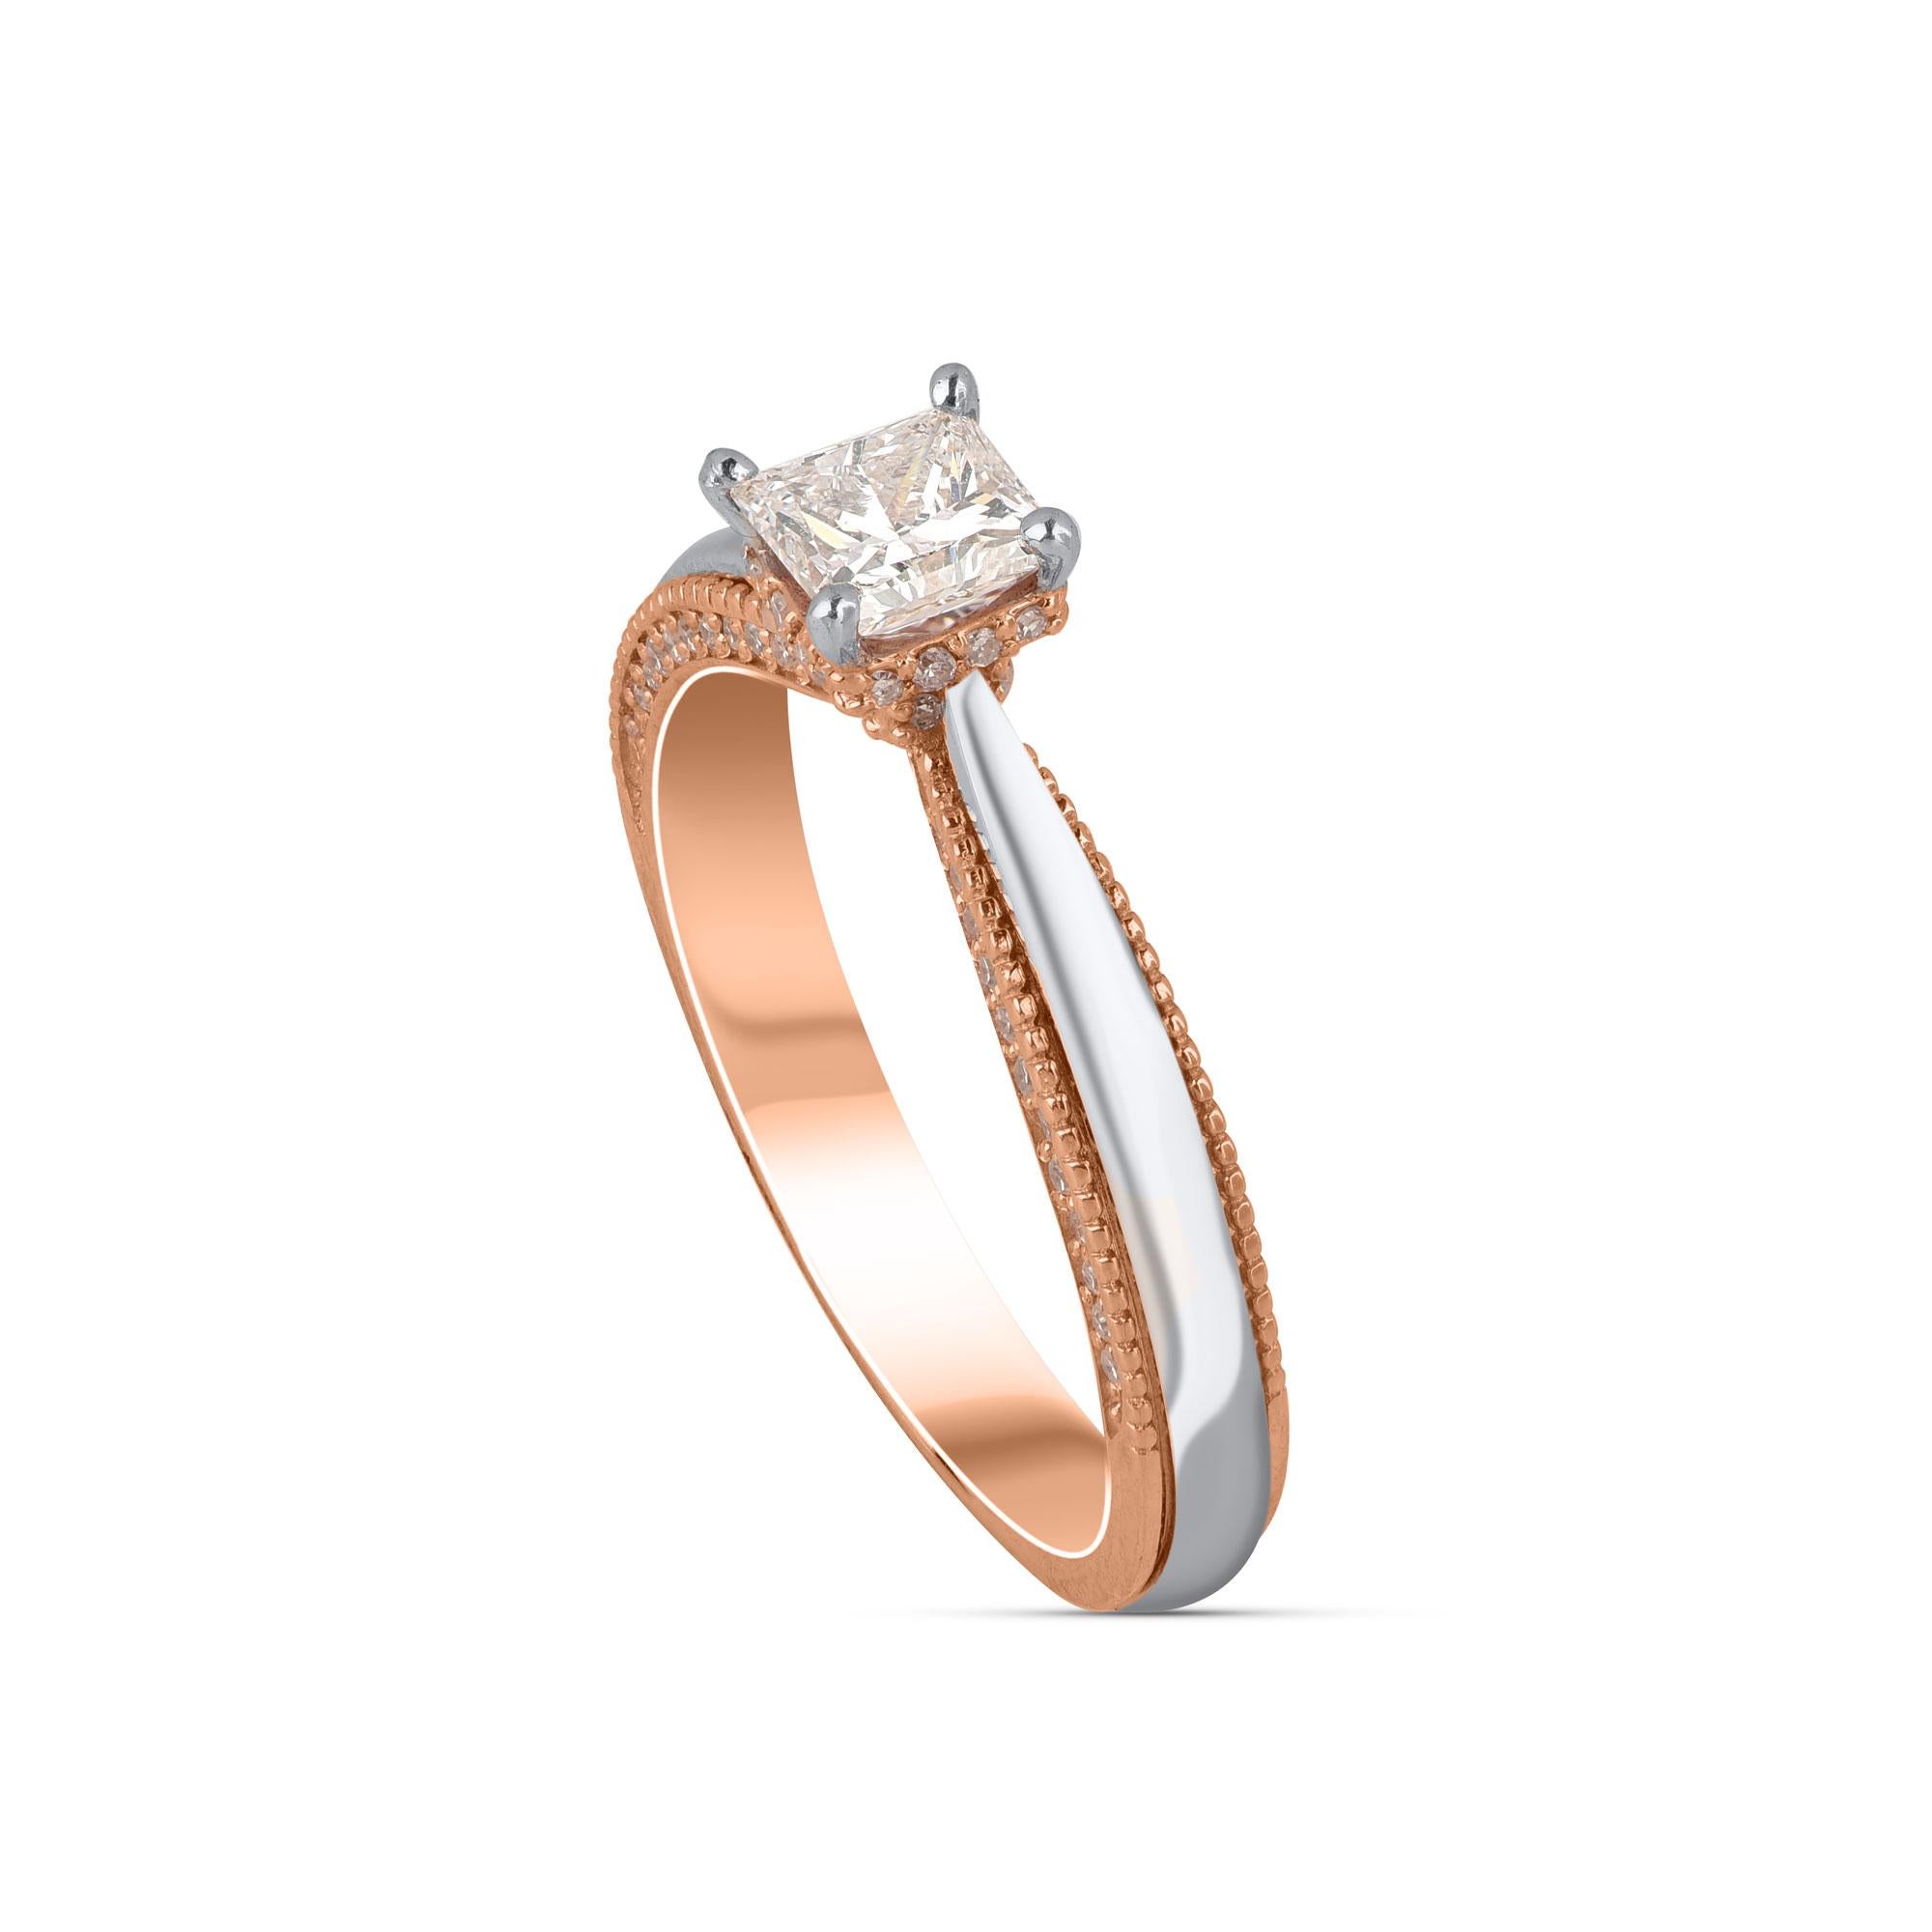 This diamond engagement ring shimmers with 1 princess-cut and 76 brilliant cut diamonds in prong setting and crafted in 18-karat two-toned gold. Diamonds are graded HI/I1.  

Metal color and ring size can be customized on request. 

This piece is